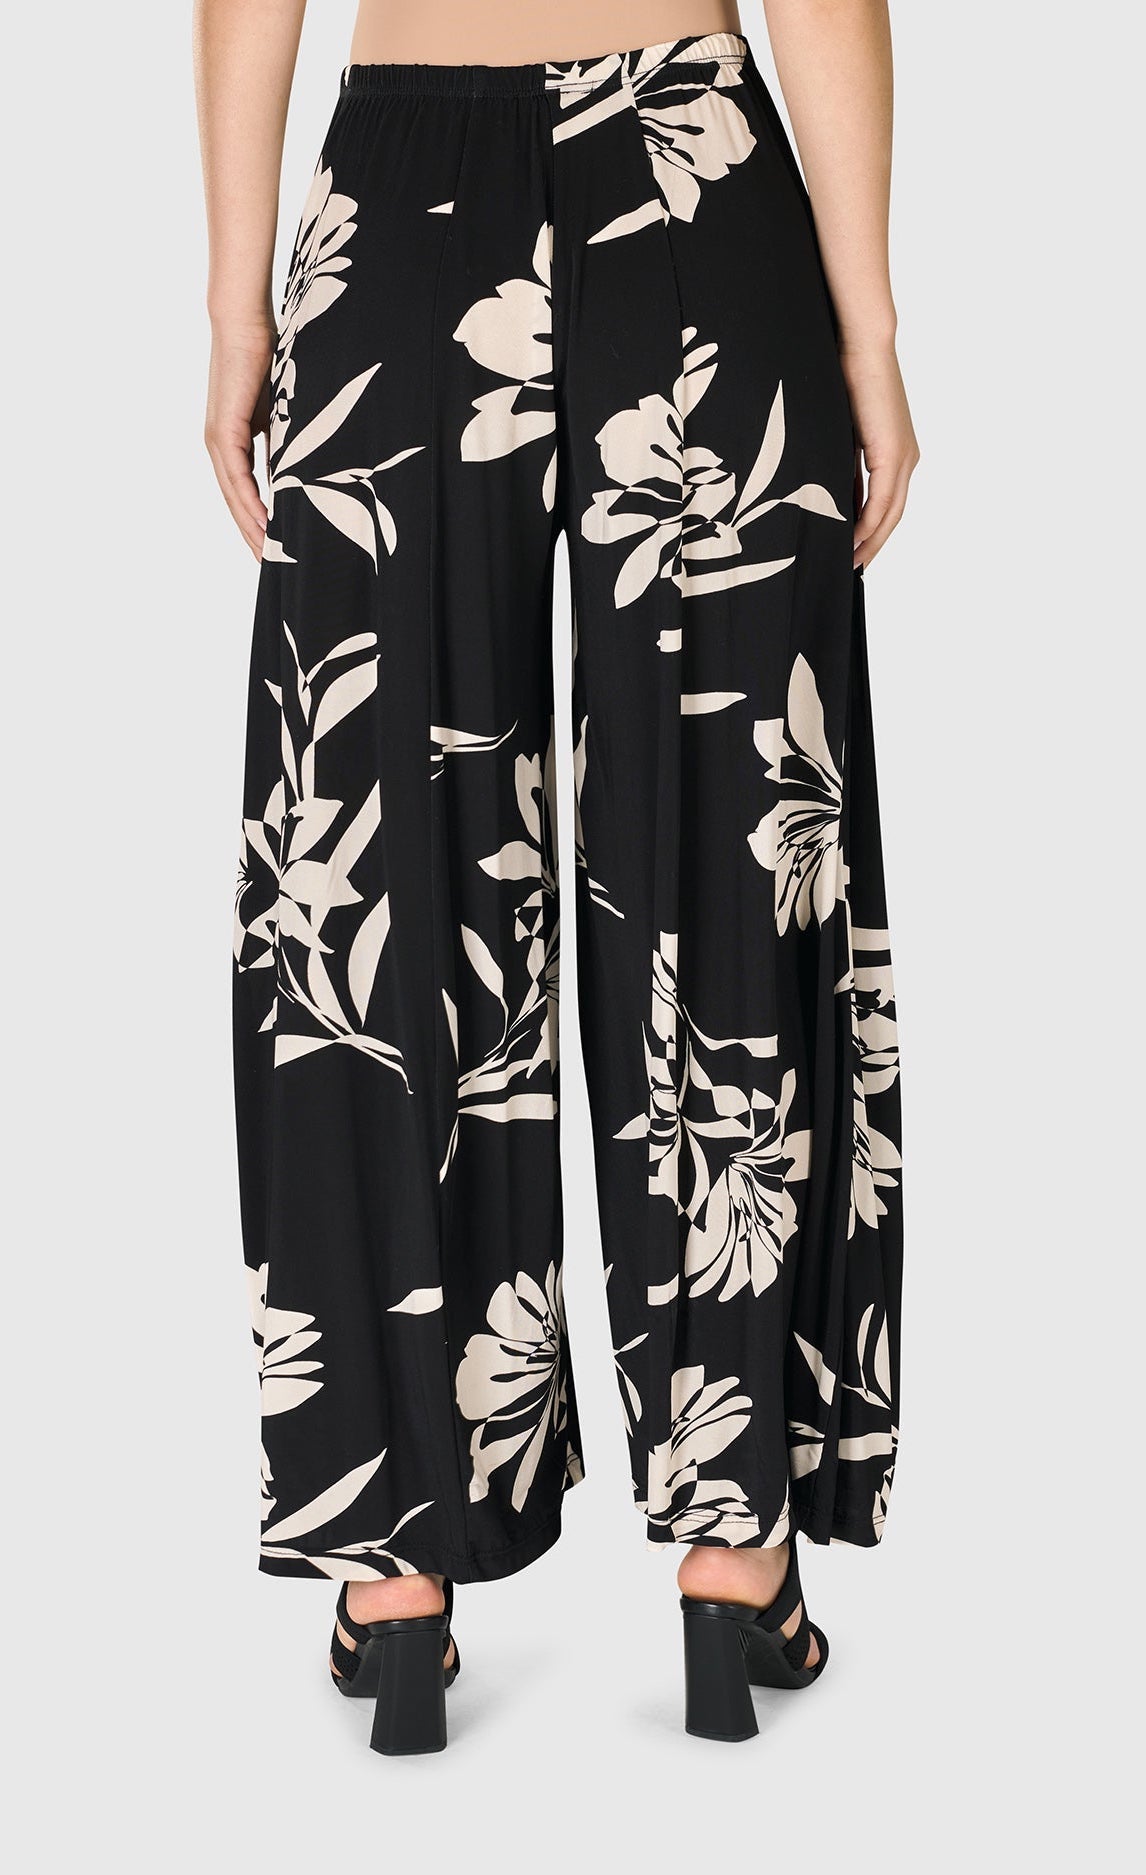 Back bottom half view of a woman wearing the floral bendetta palazzo pants